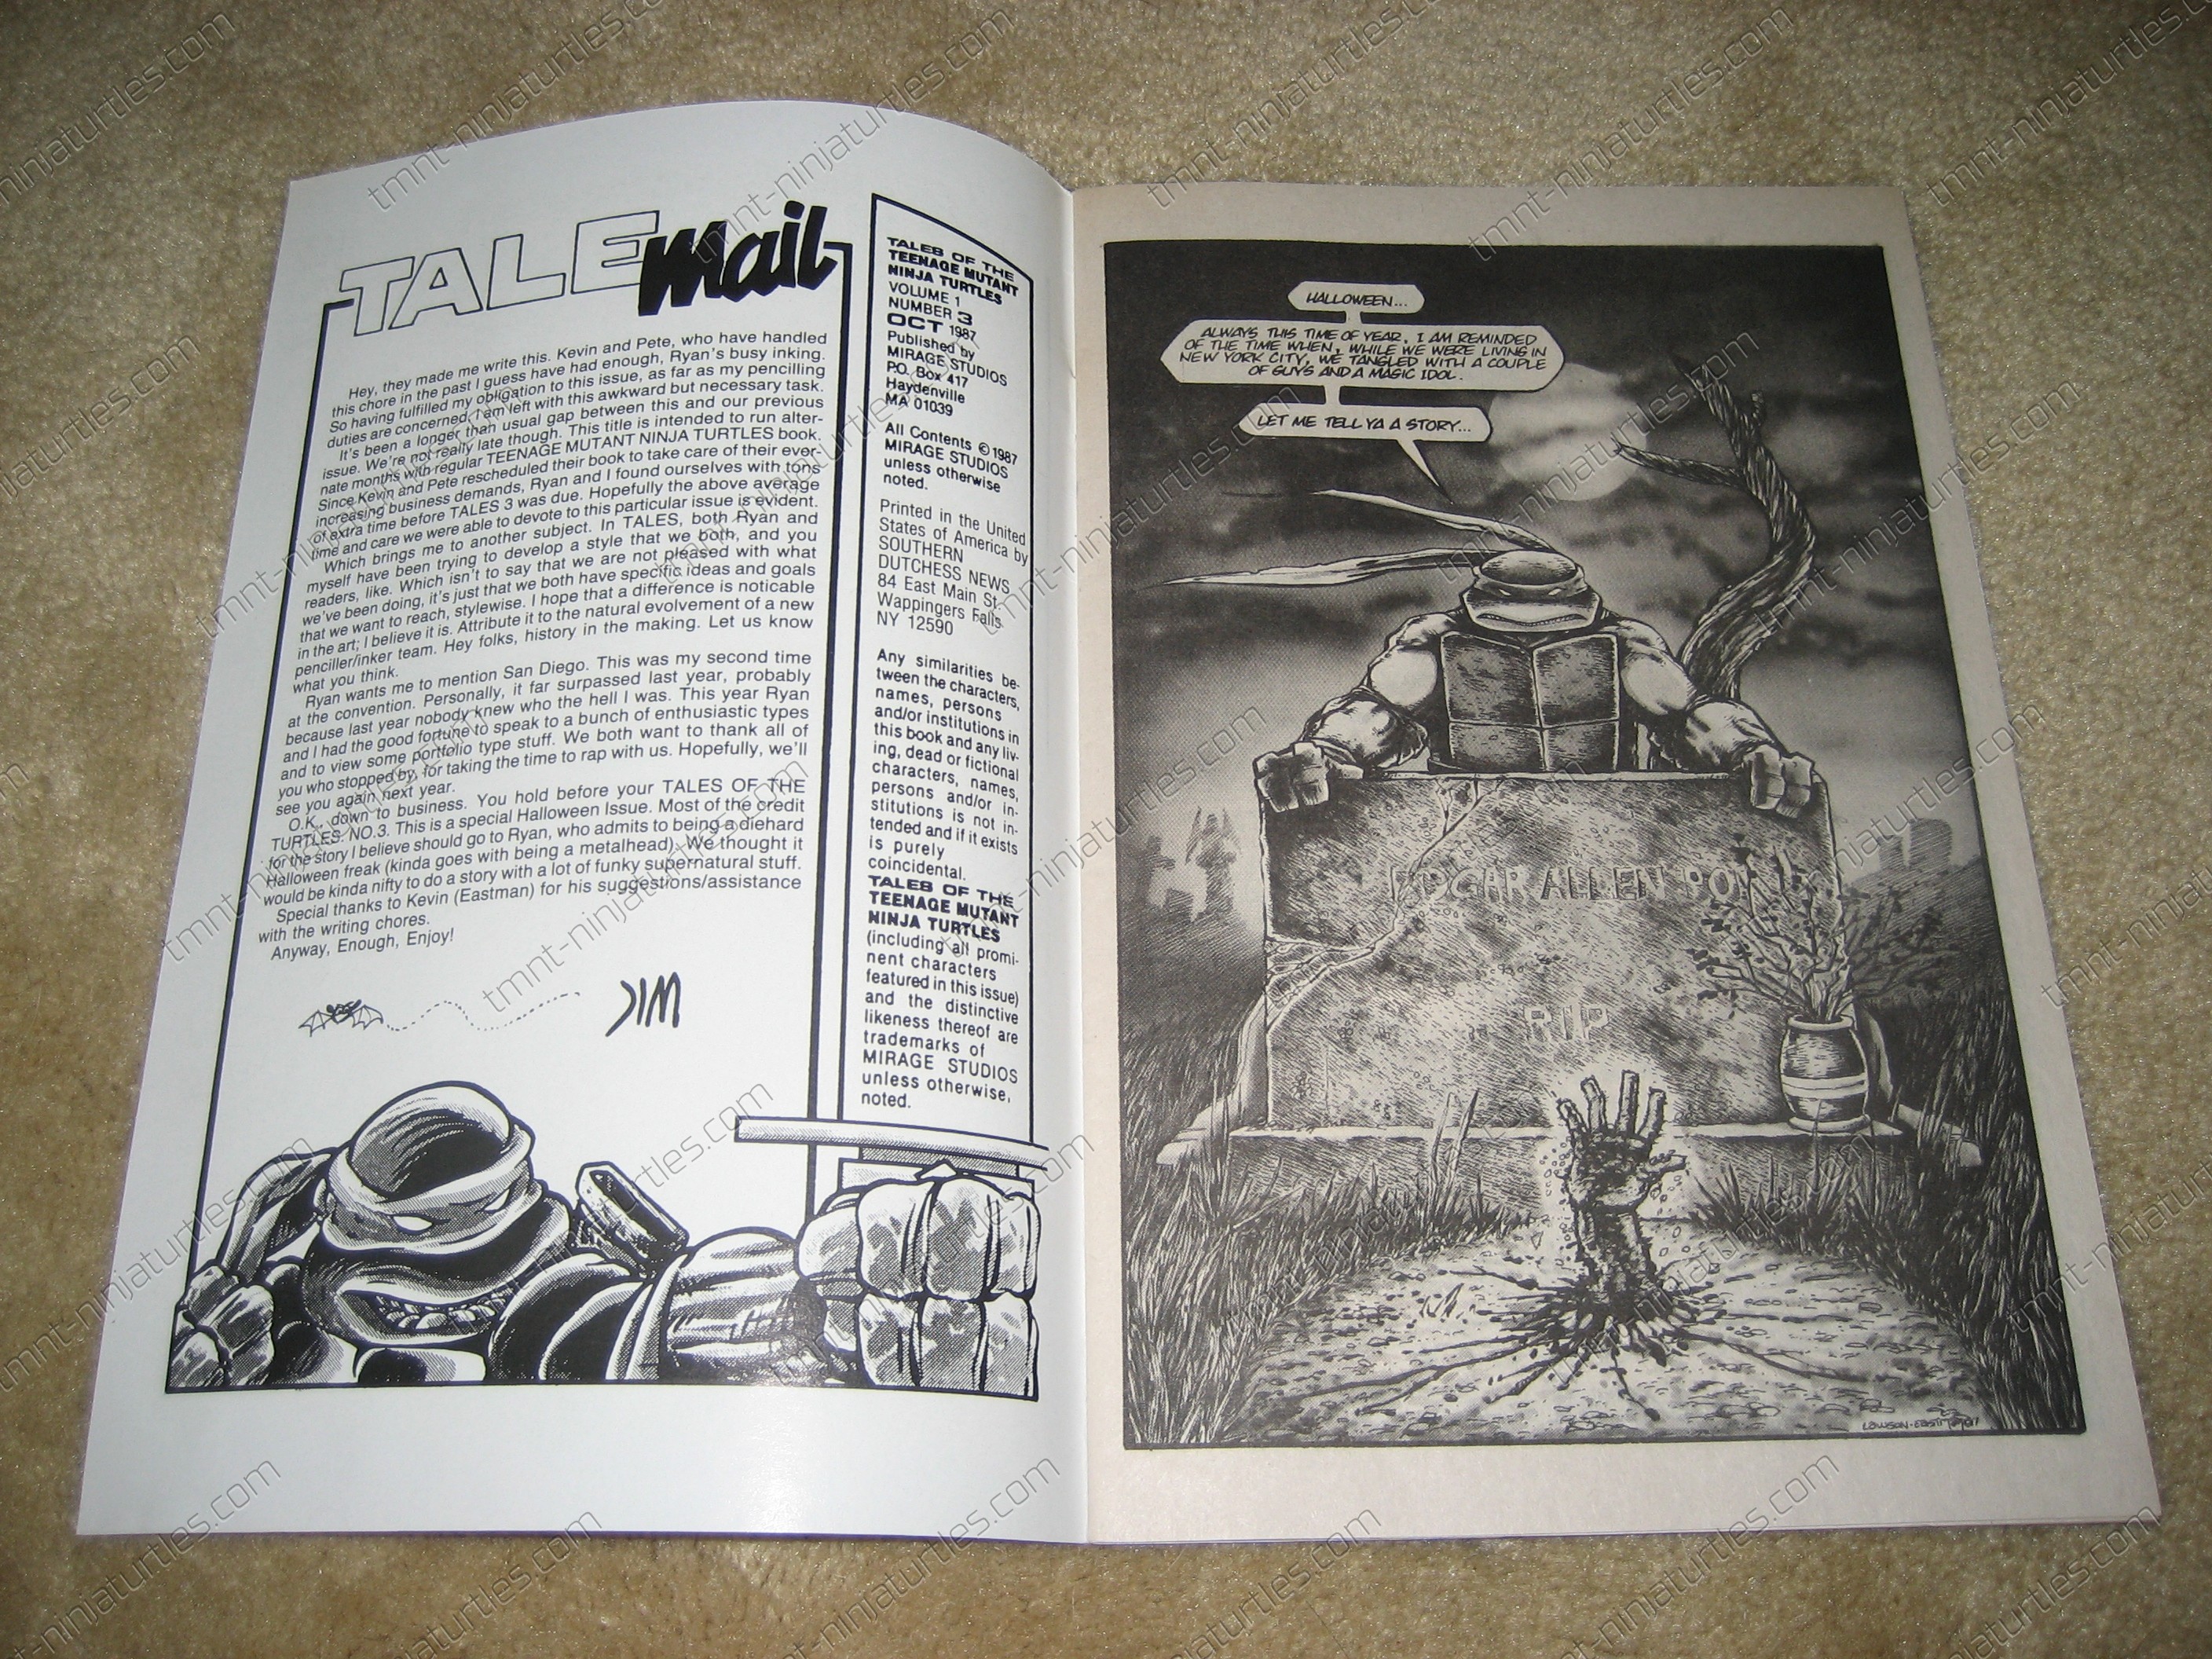 Tales-of-the-TMNT-03_1st-print_inside-front-page-October-19871.jpg